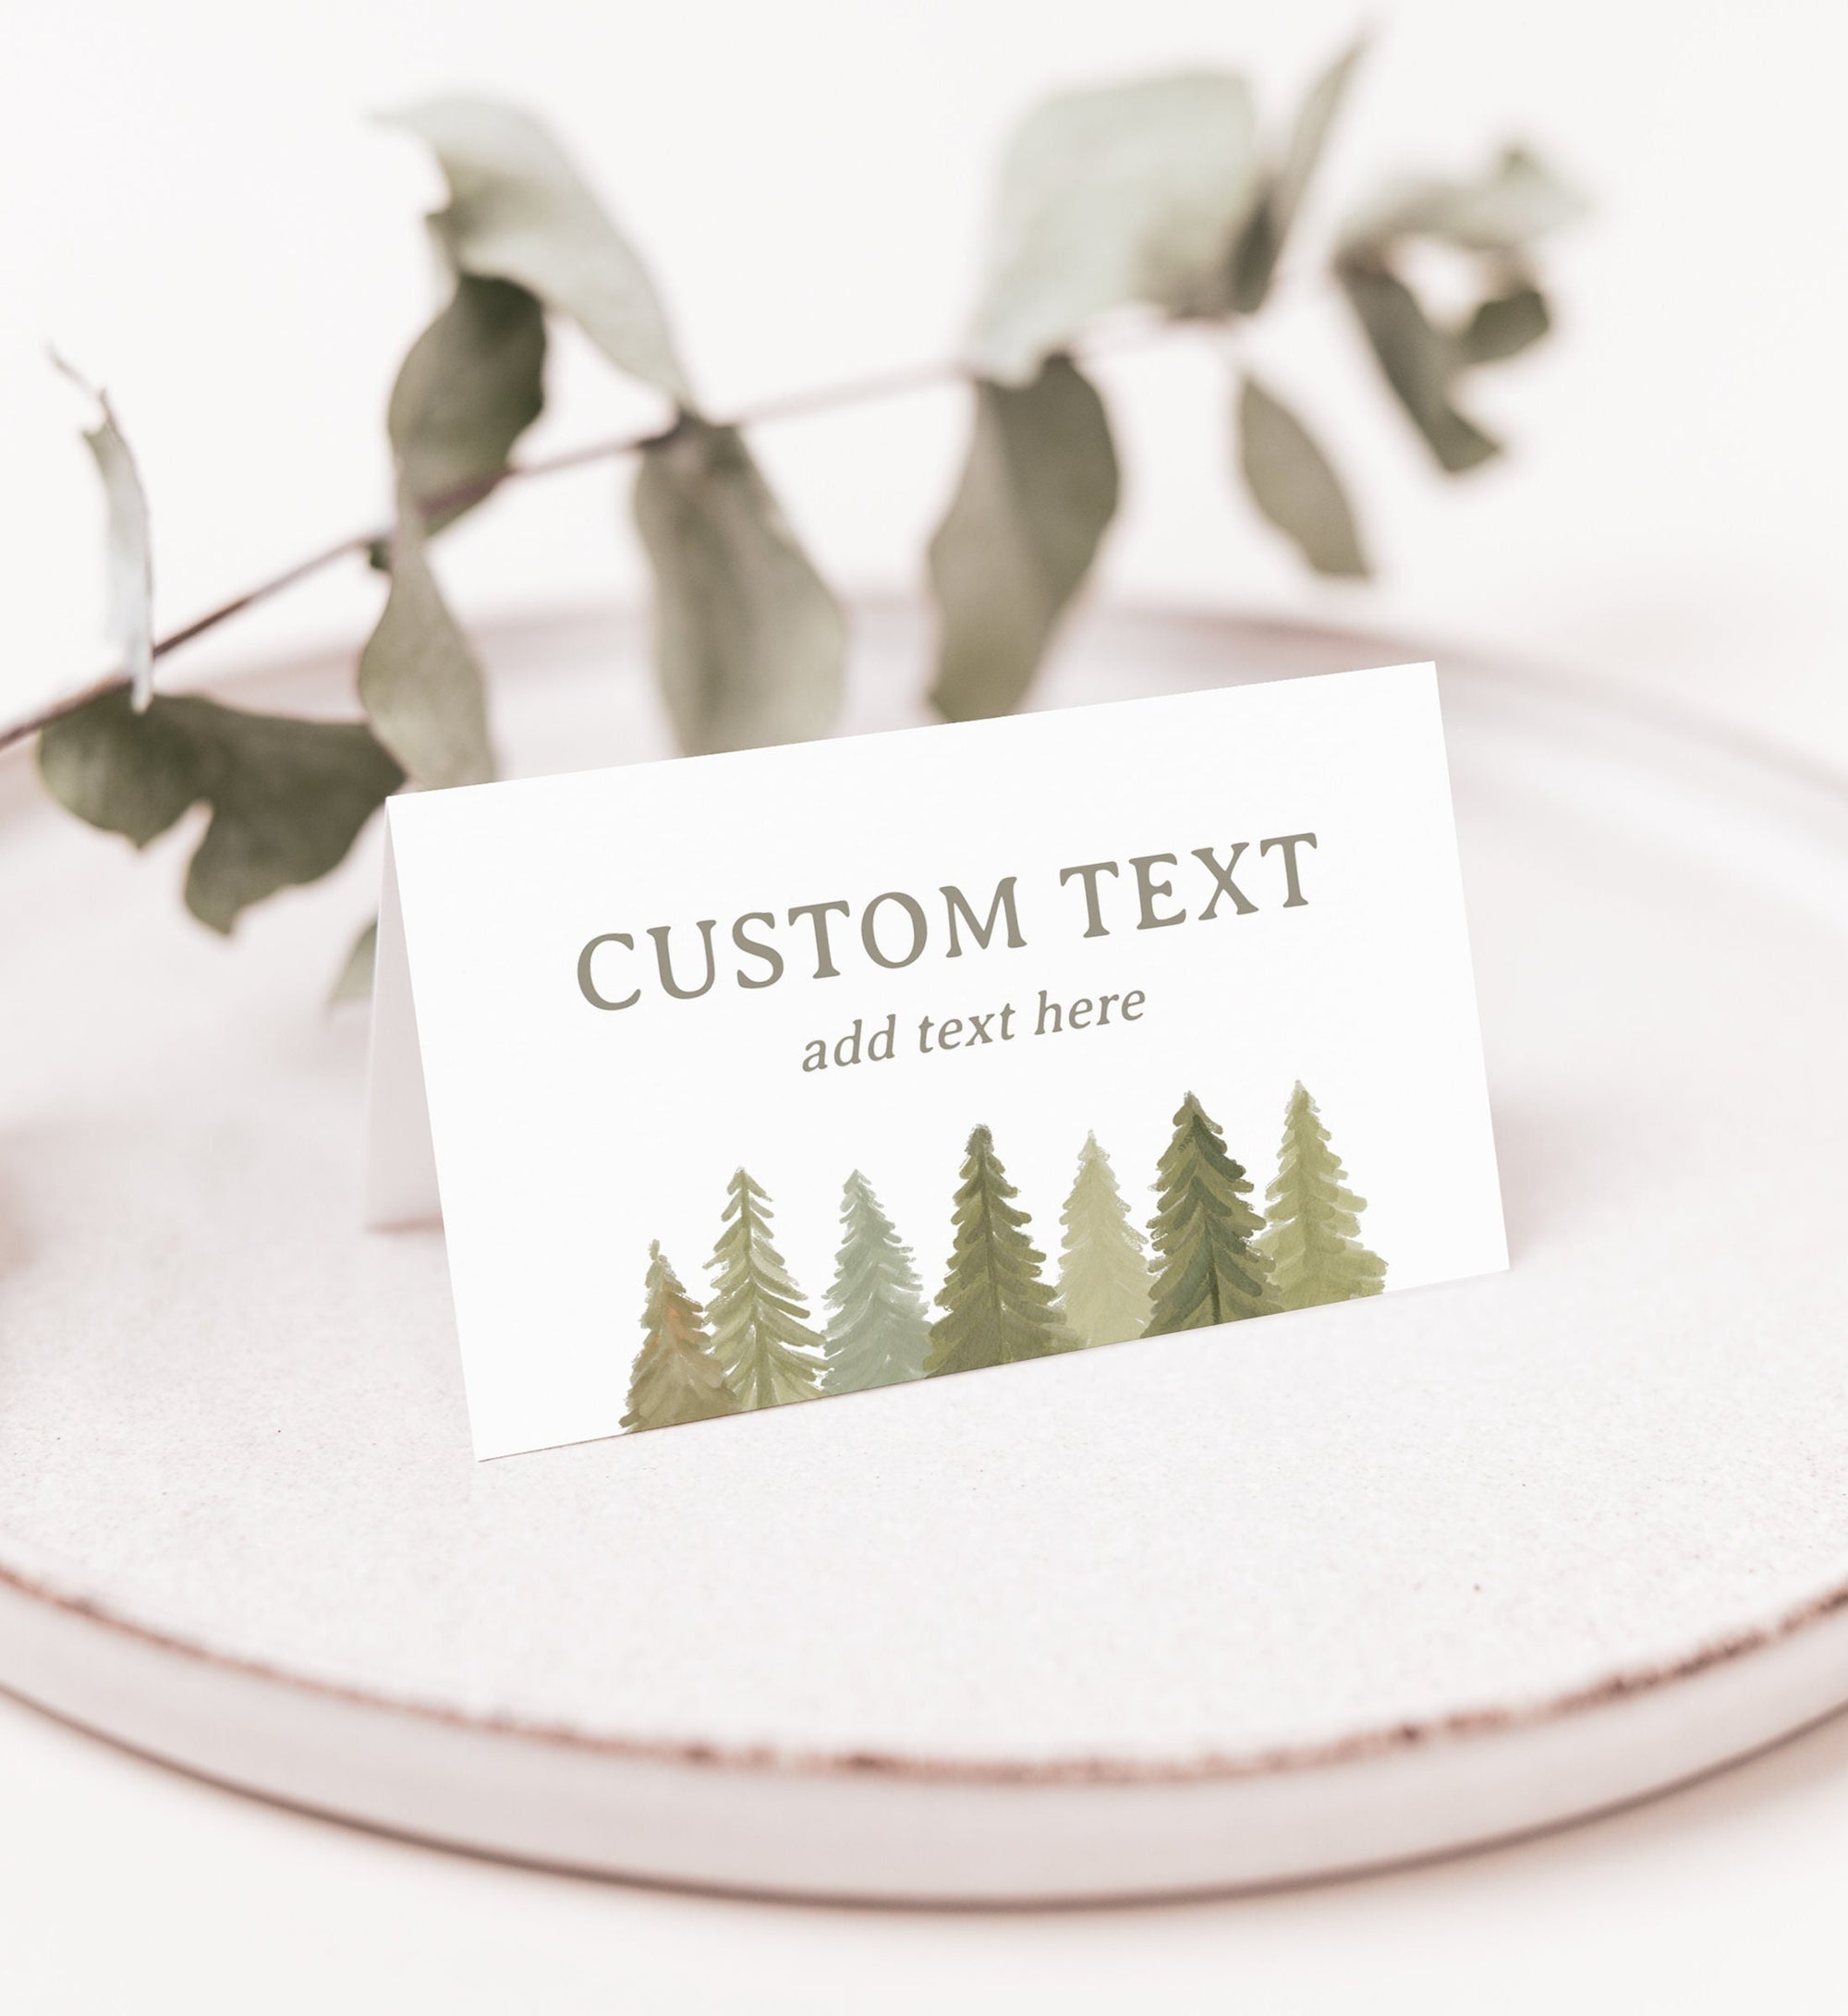 Editable Woodland Baby Shower Place Card Template, Printable Woodland Baby Shower Tent Card, DIGITAL DOWNLOAD